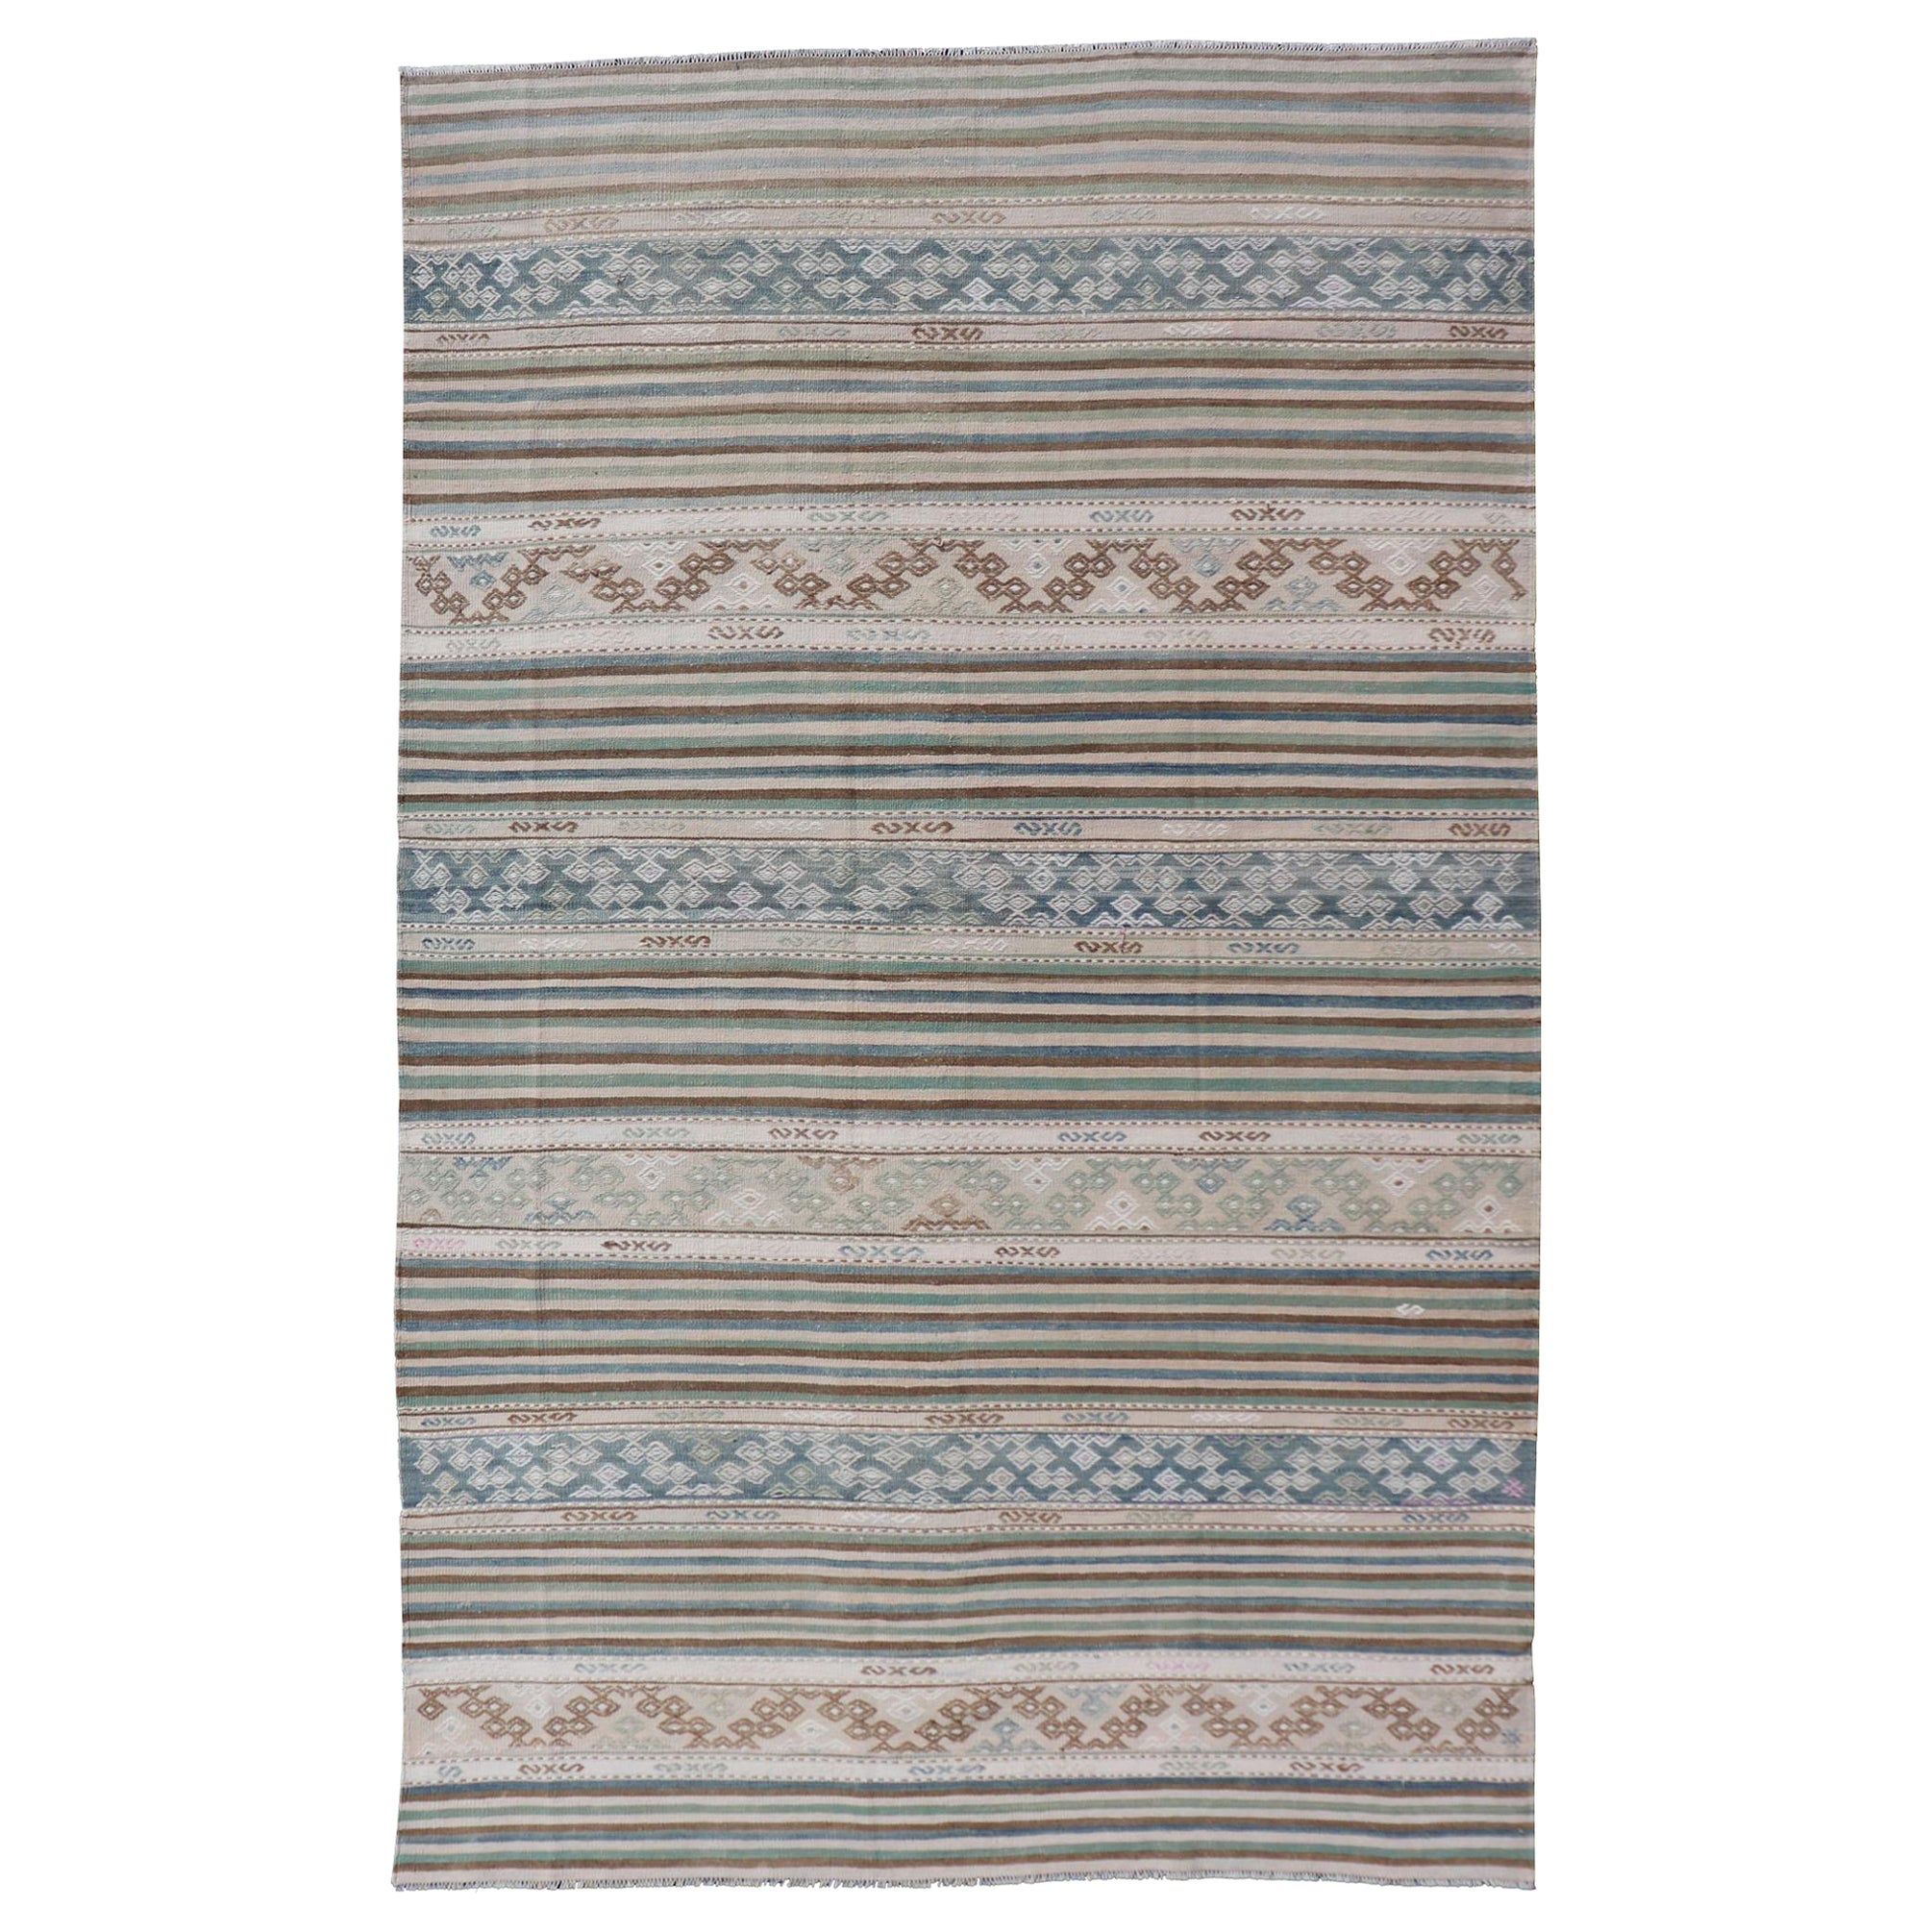 Turkish Flat-Weave Kilim with Stripes and Embroideries In Blue, Green, and Cream